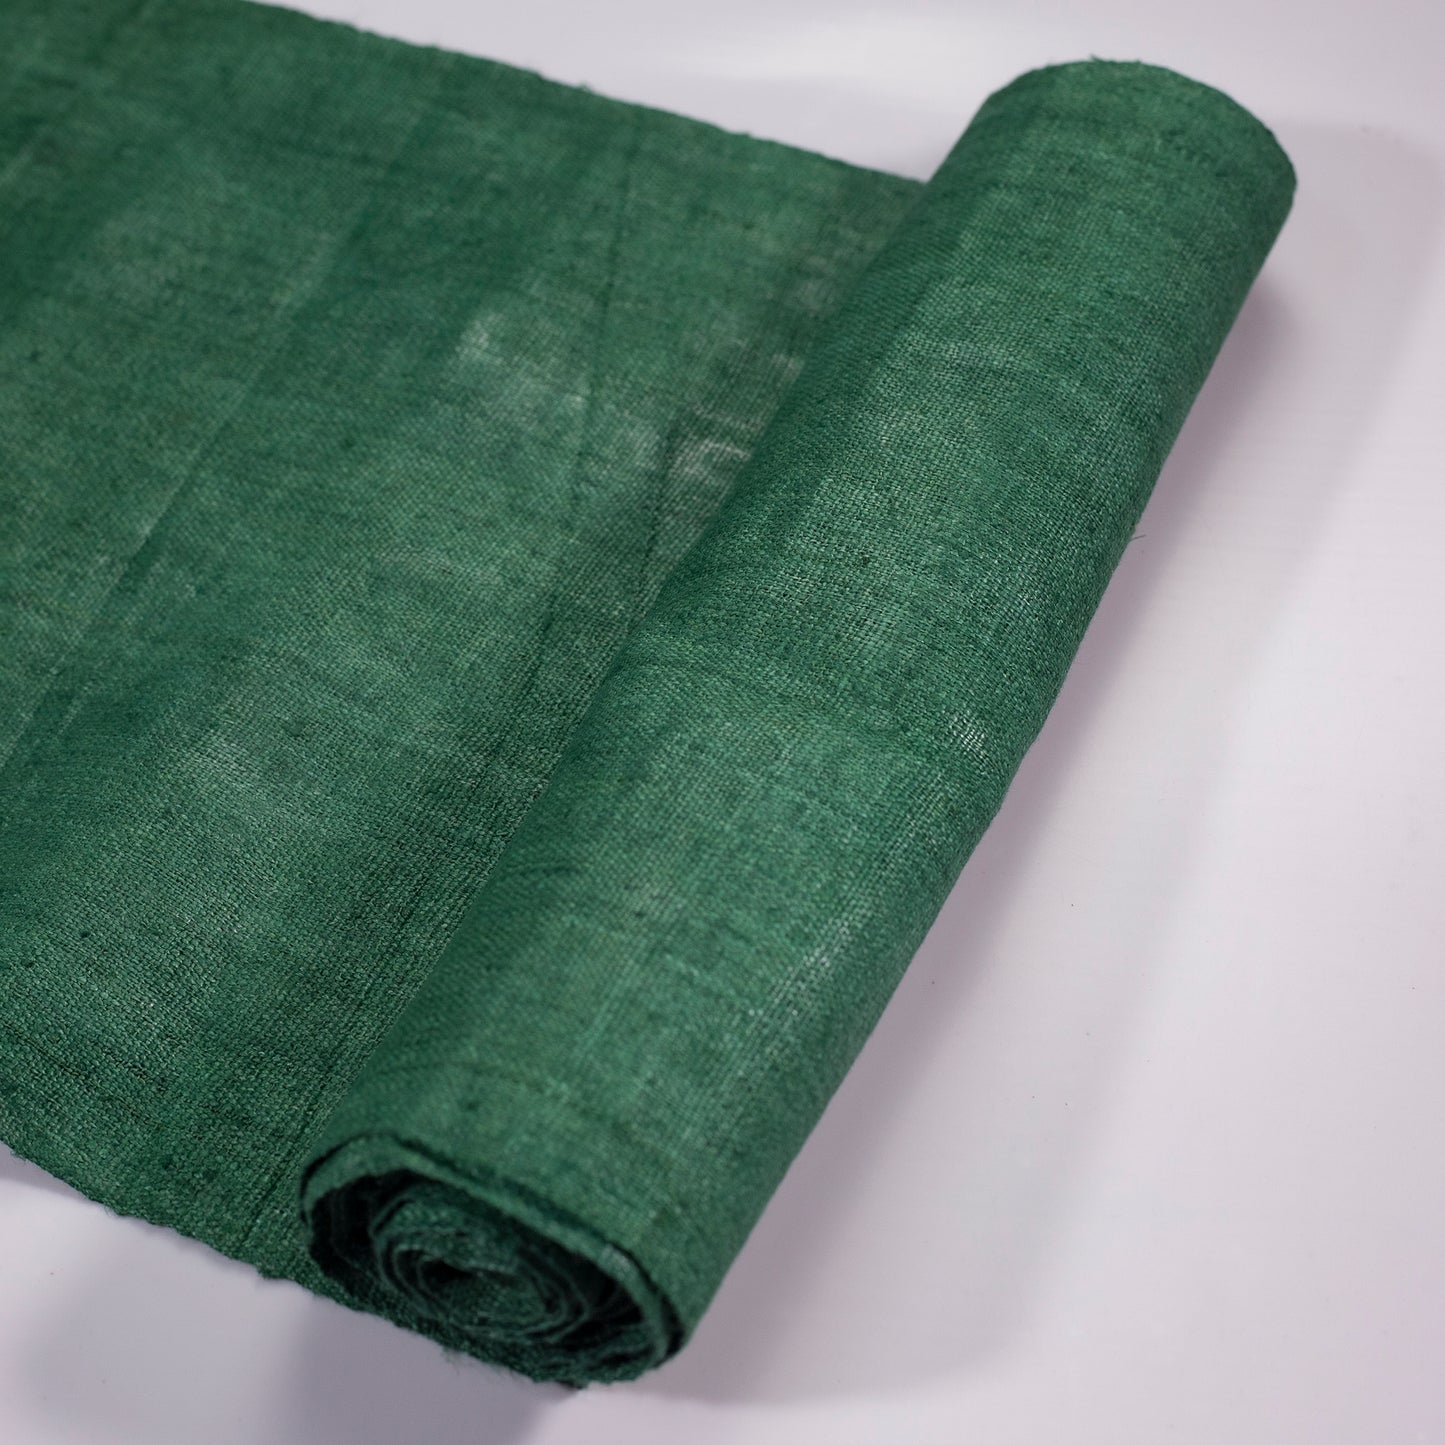 Raw hemp fabric, natural color in MYRTLE GREEN